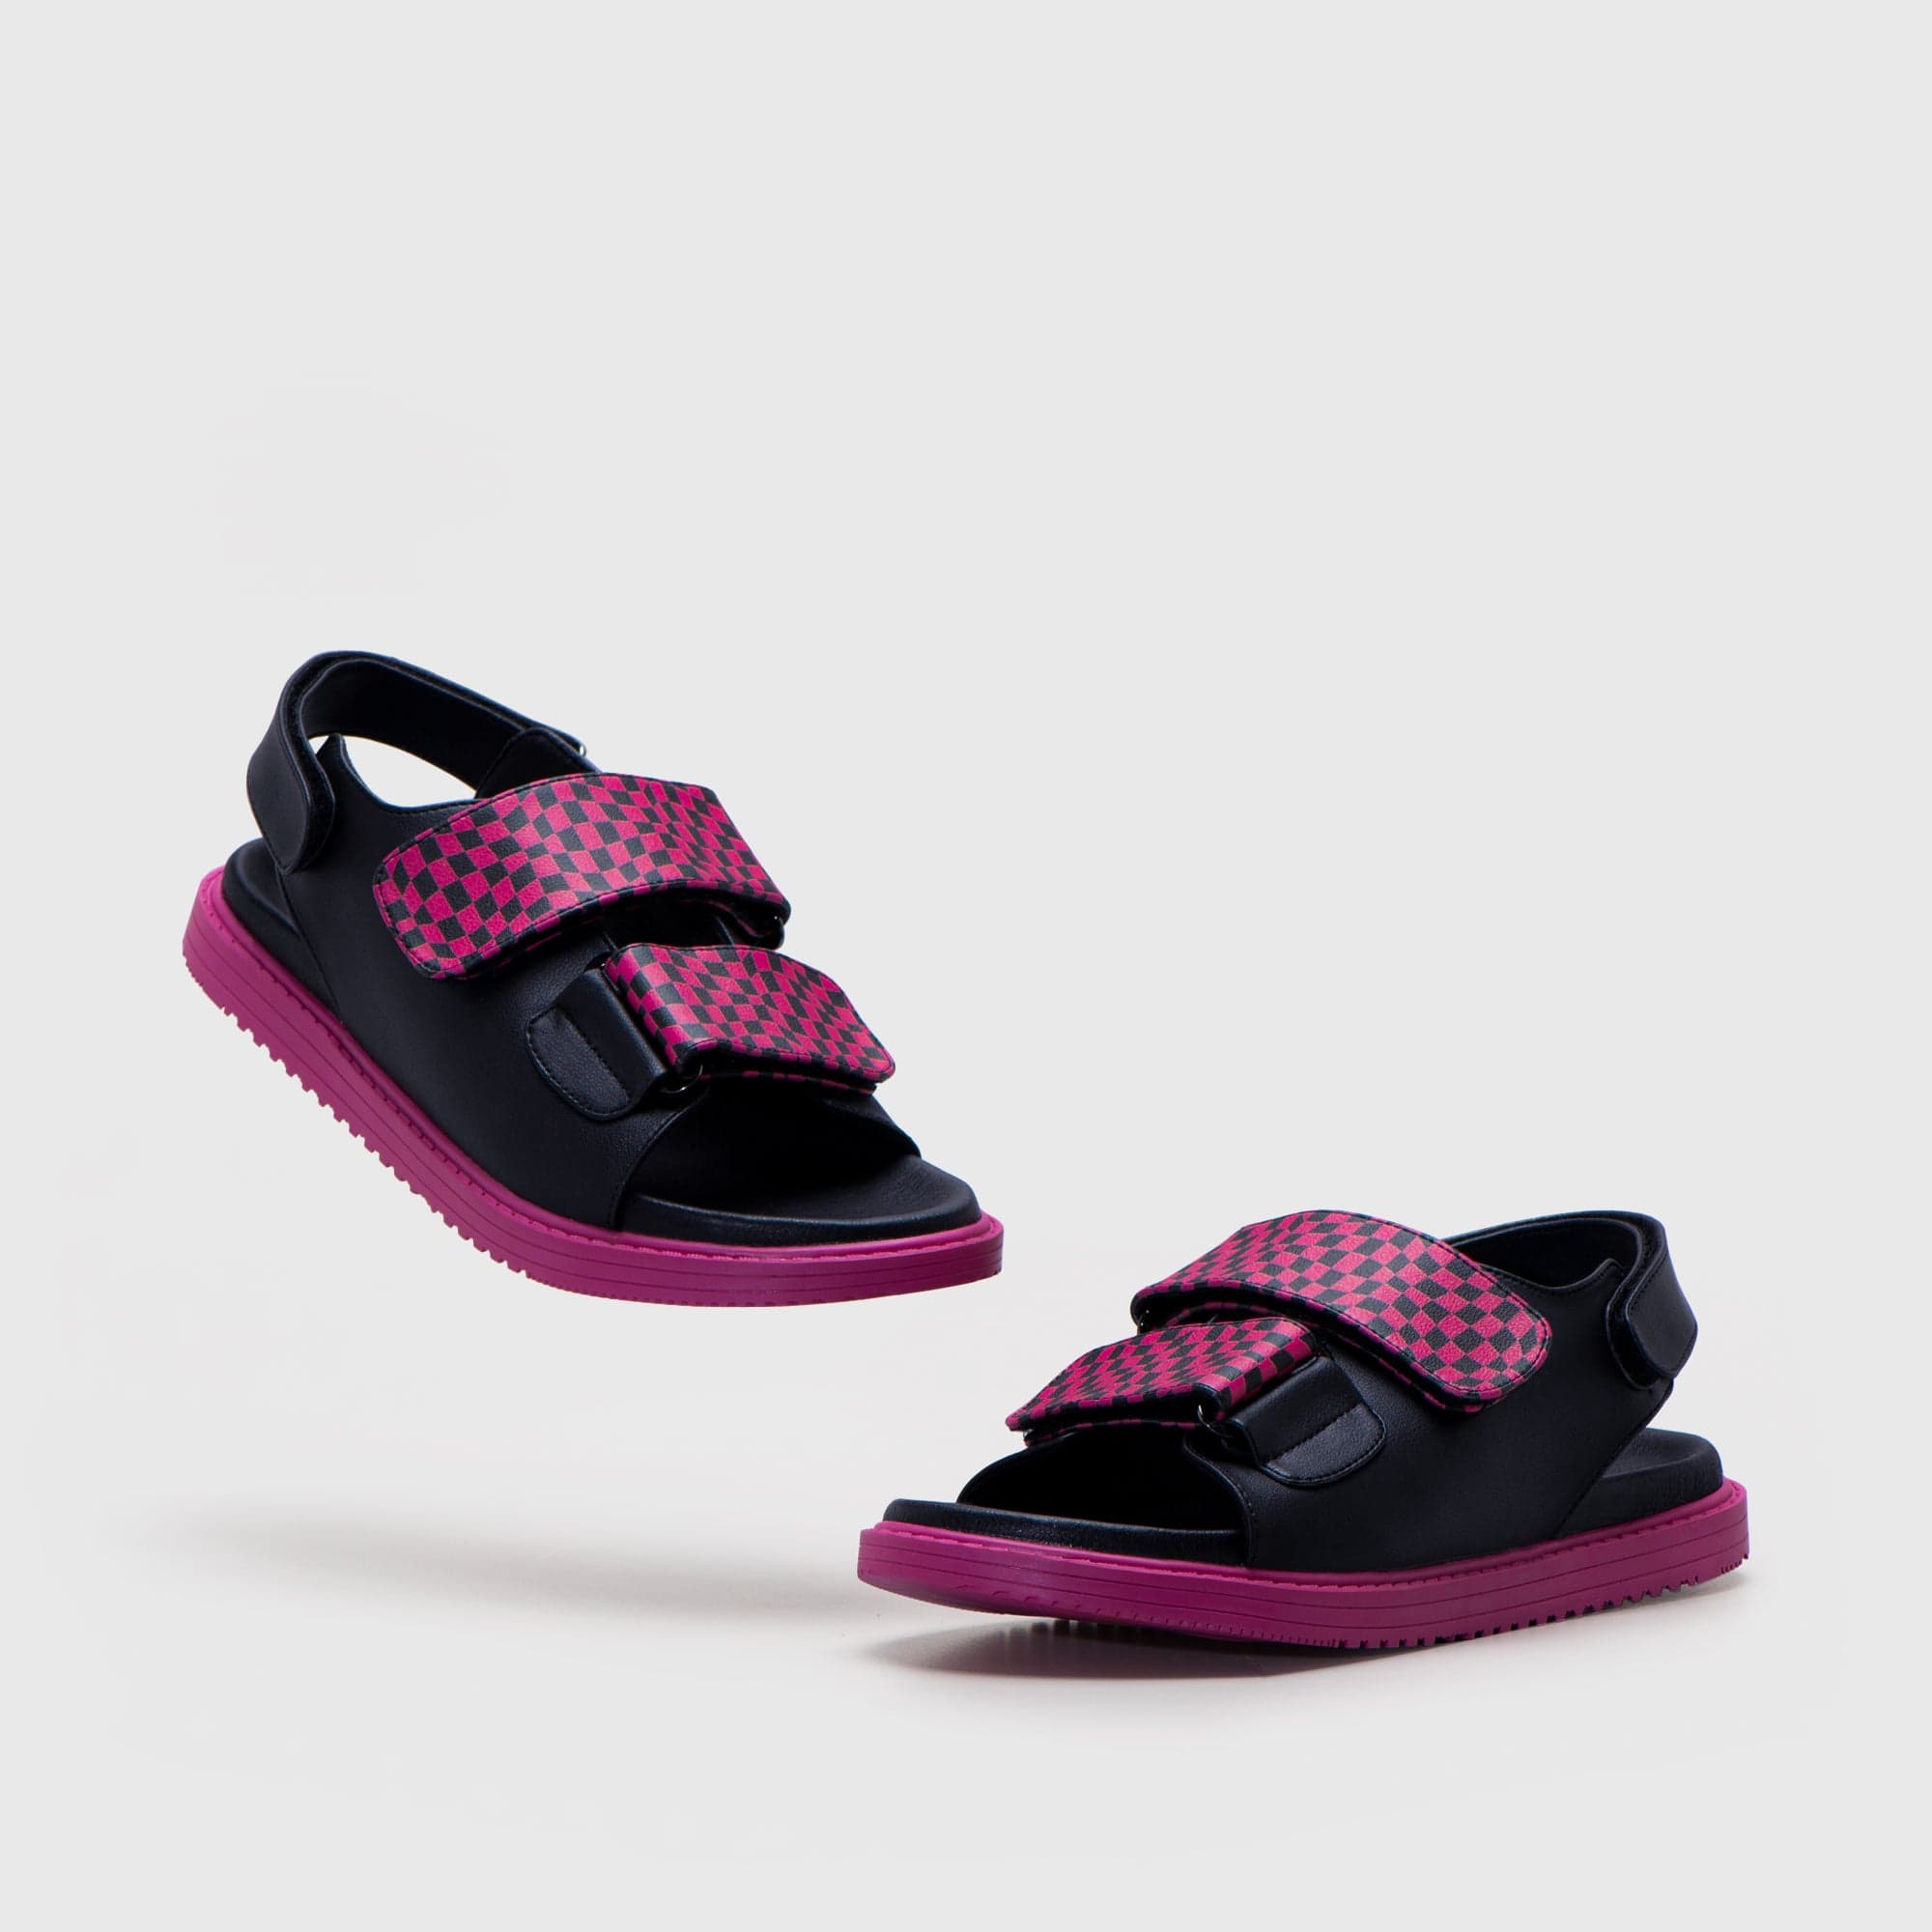 Adorable Projects Official Sandals Beatrisa Sandals Square